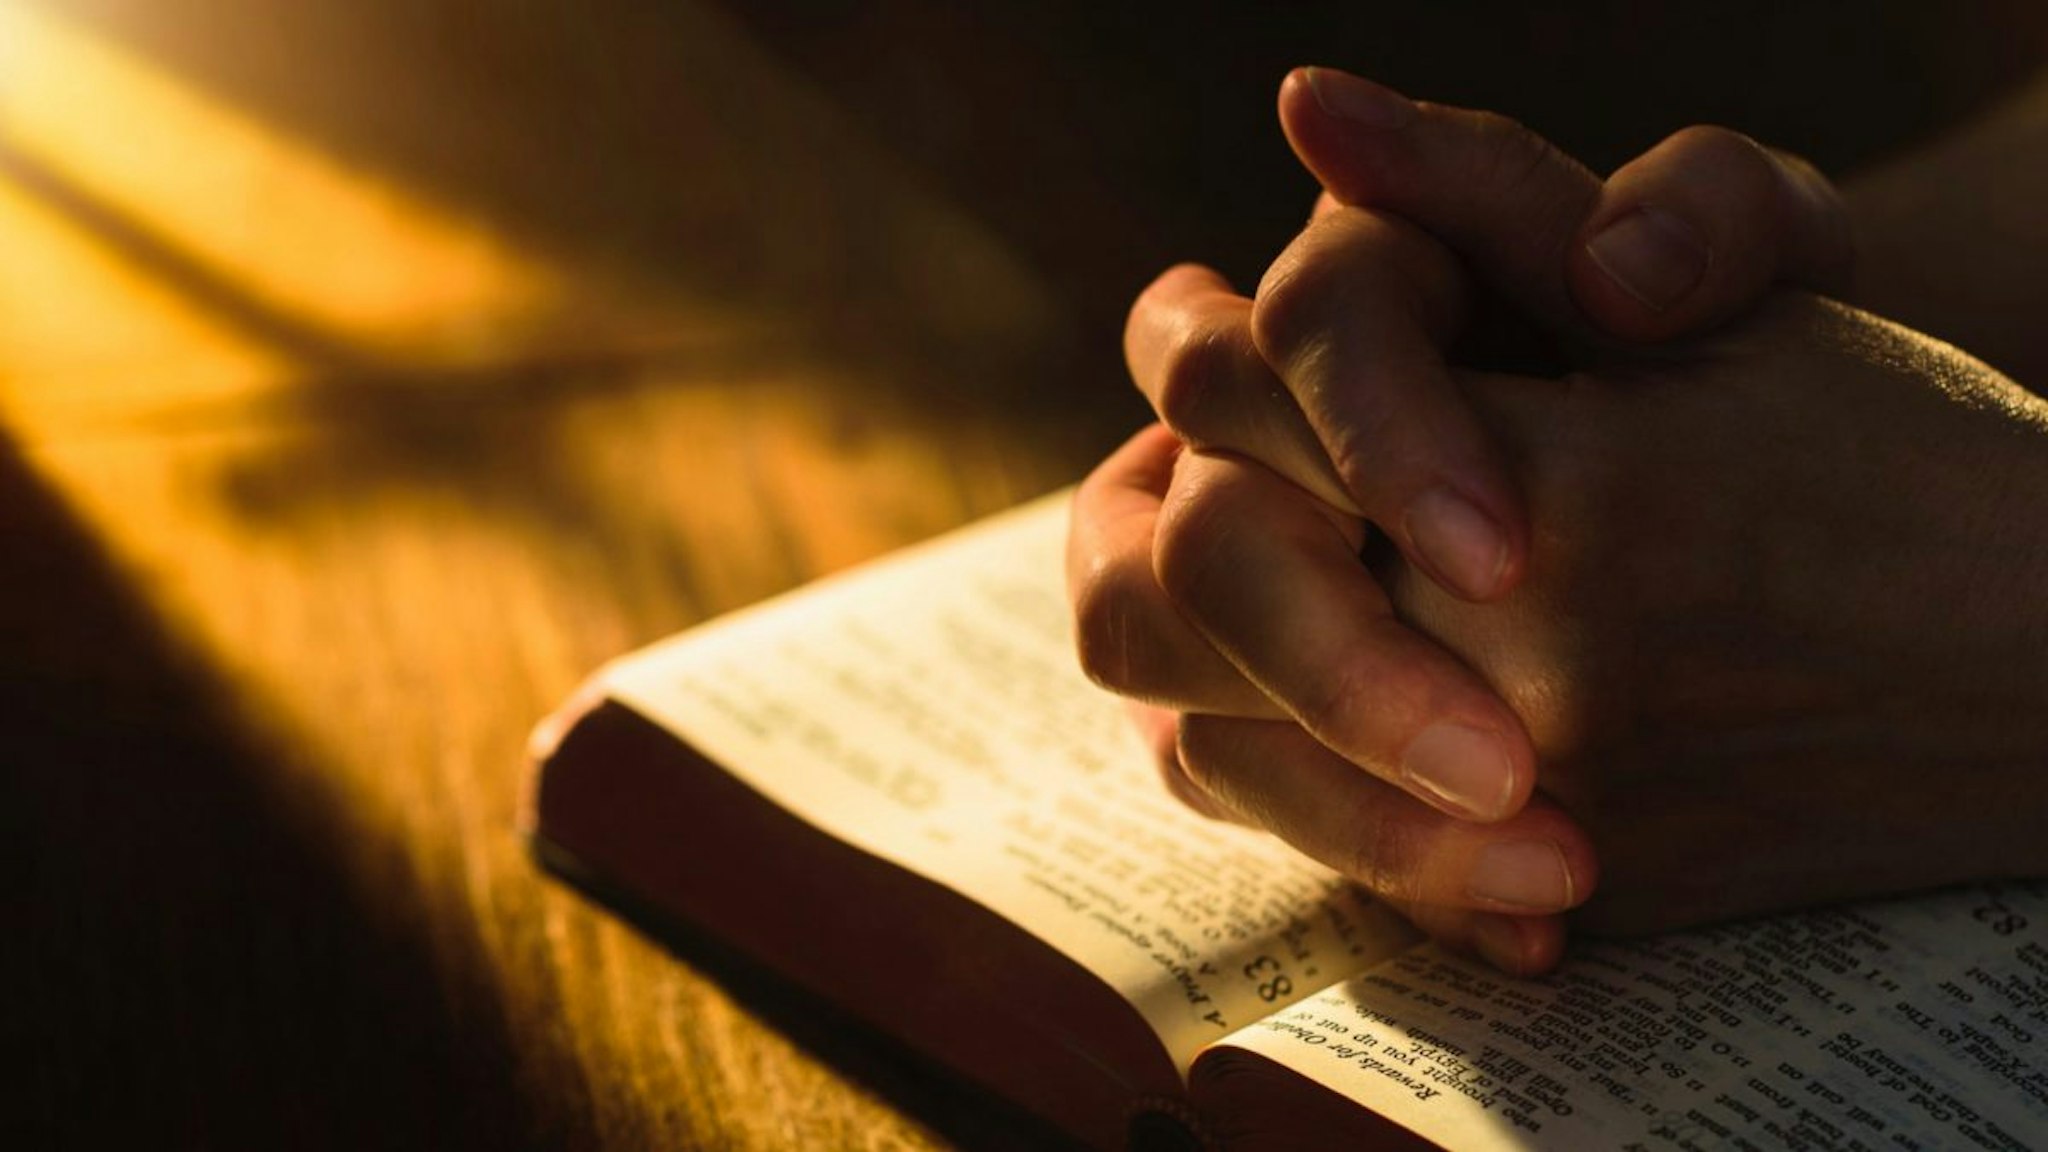 Close up of hands clasped on open Bible - stock photo.